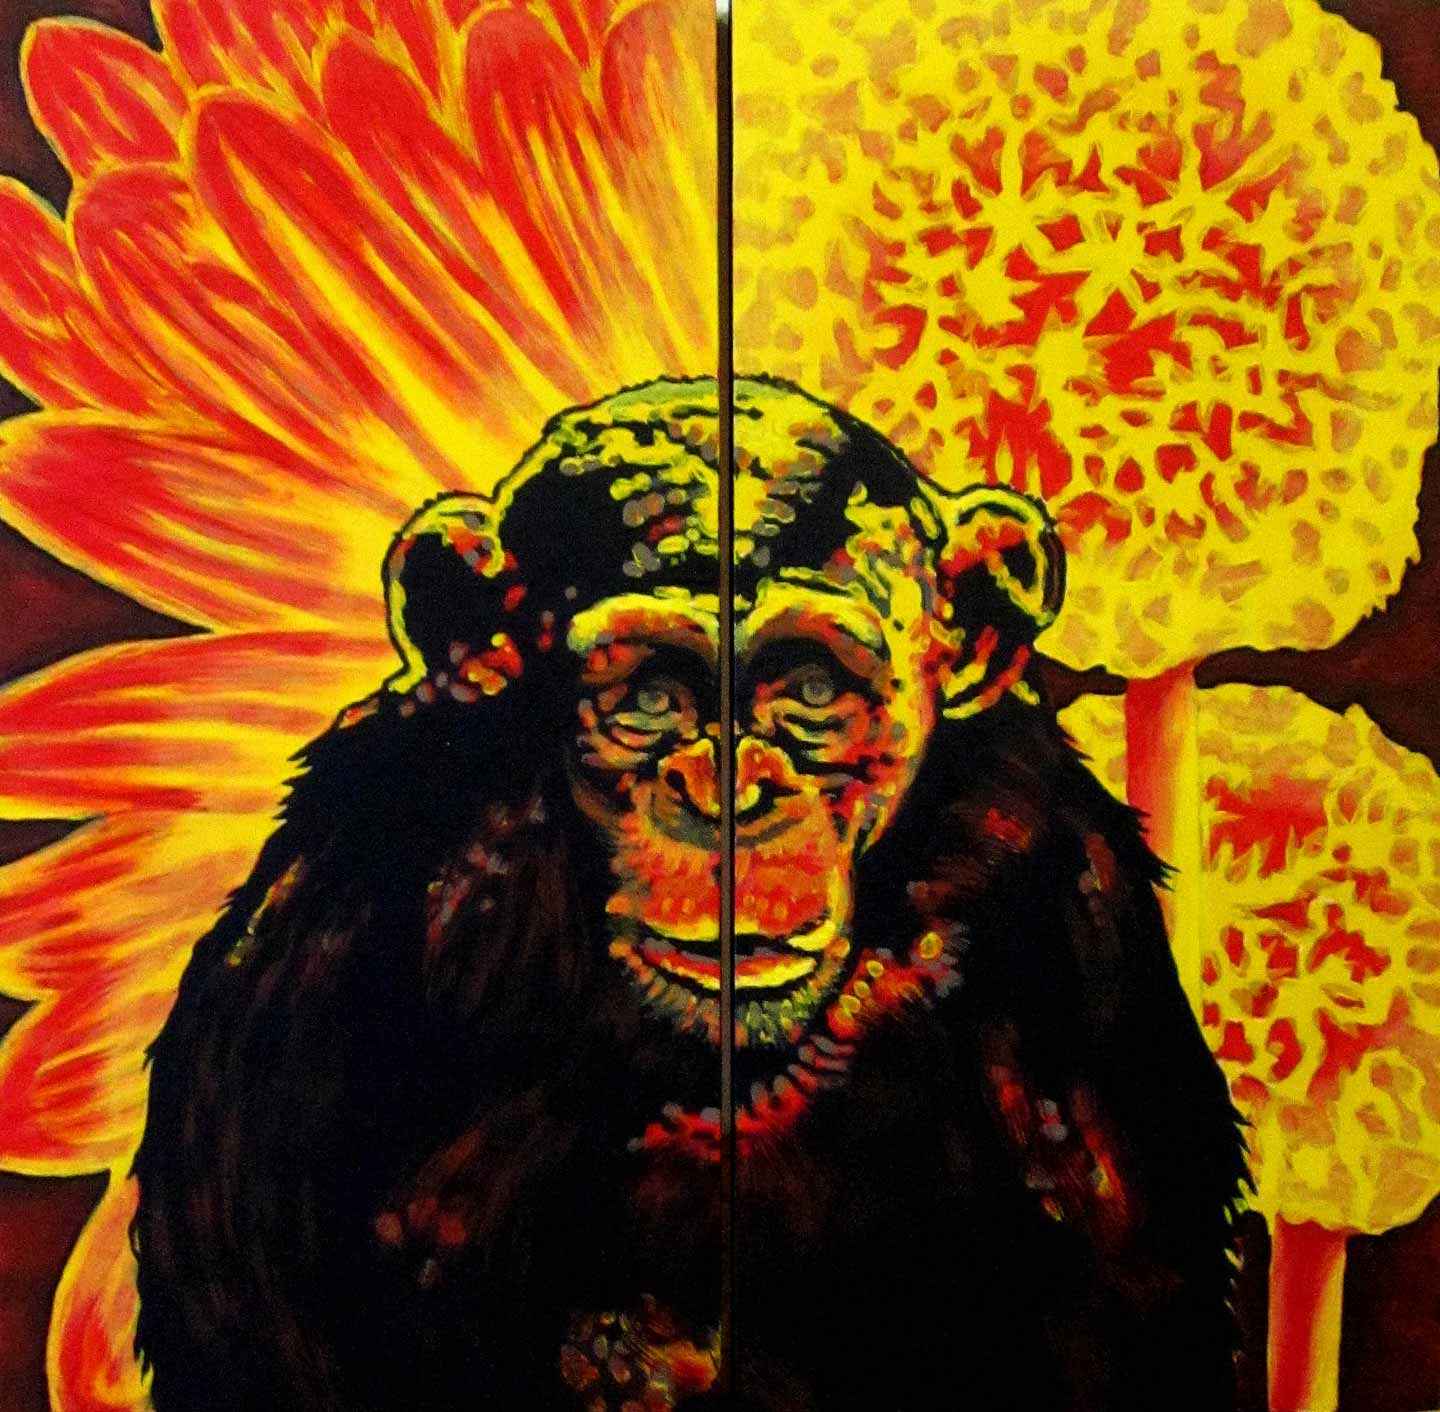 "Year of the Monkey", 24x24